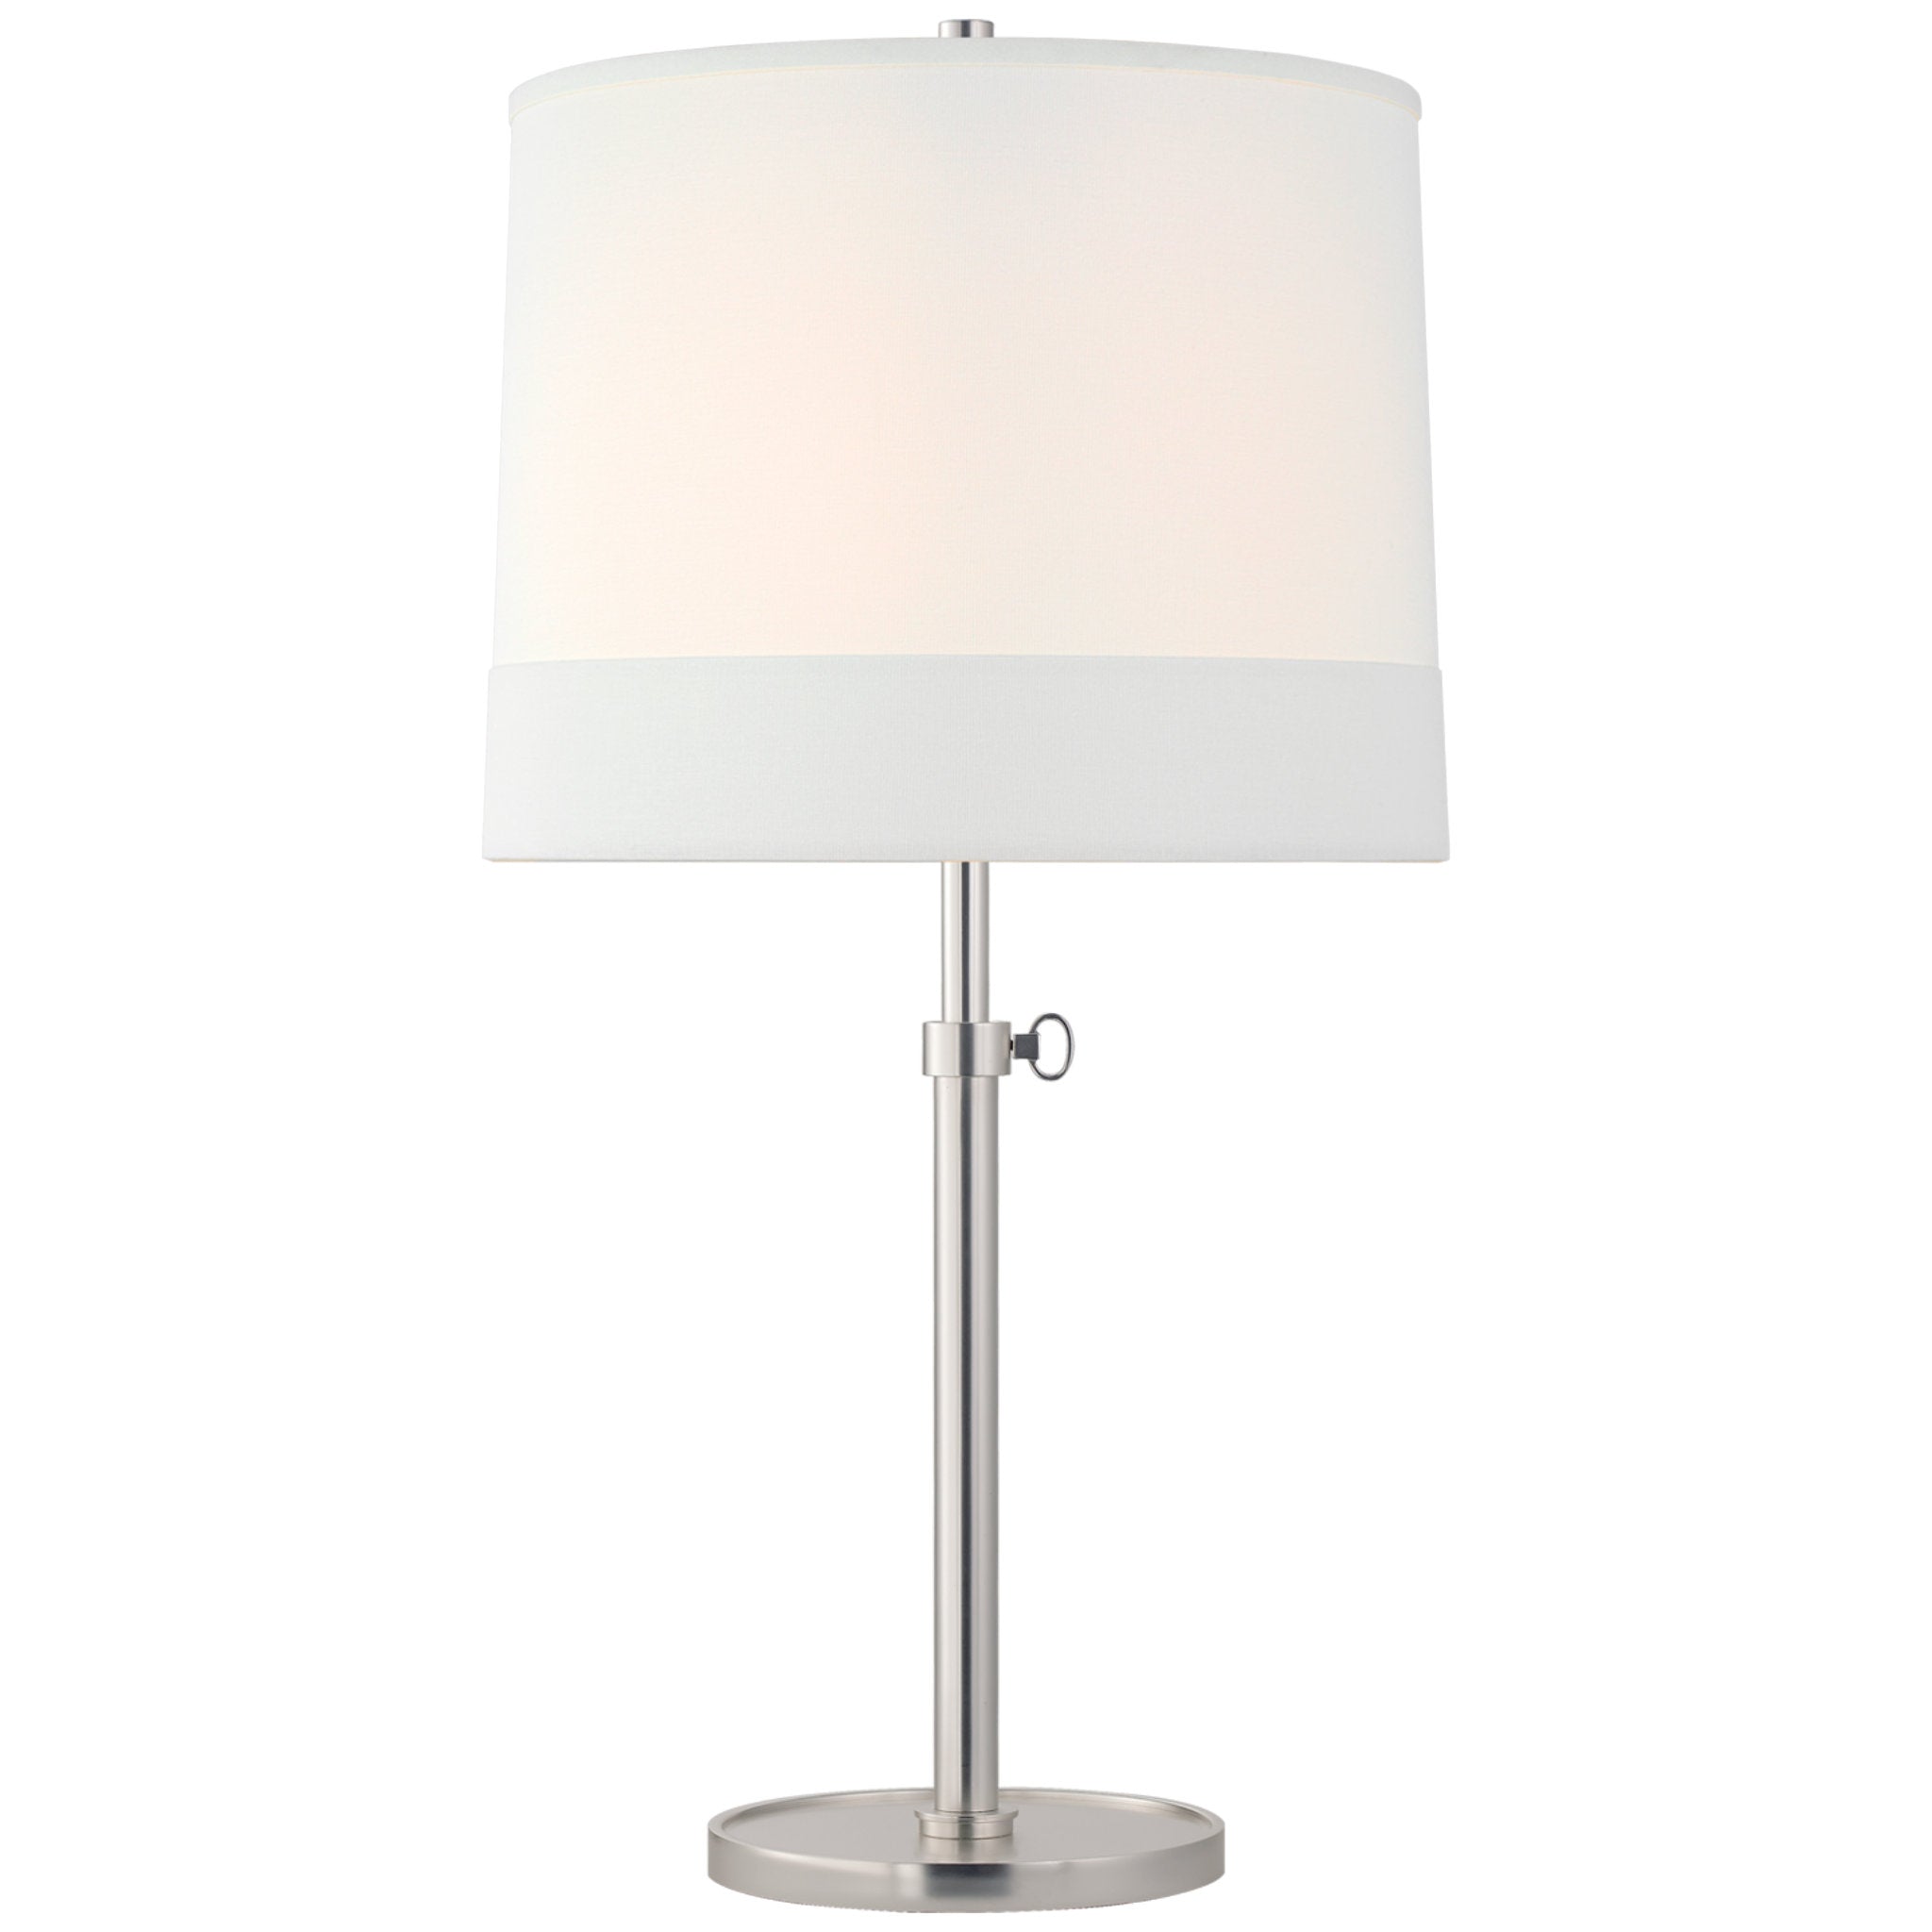 Barbara Barry Simple Adjustable Table Lamp in Soft Silver with Banded Linen Shade